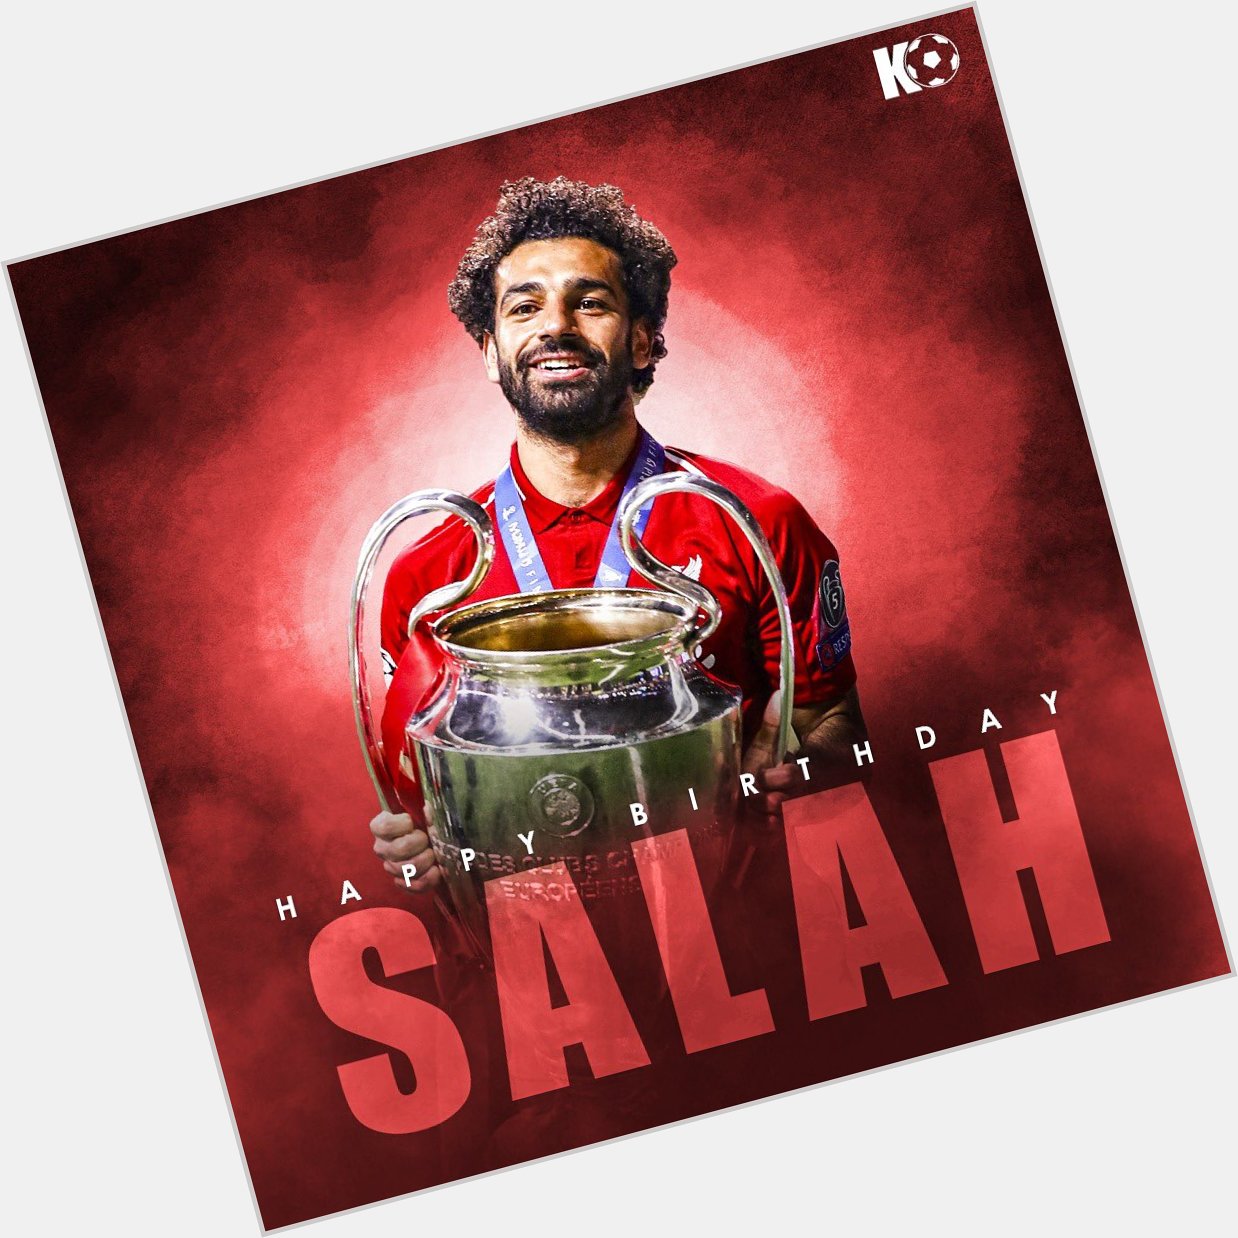 Join in wishing Mohamed Salah a Happy Birthday! 